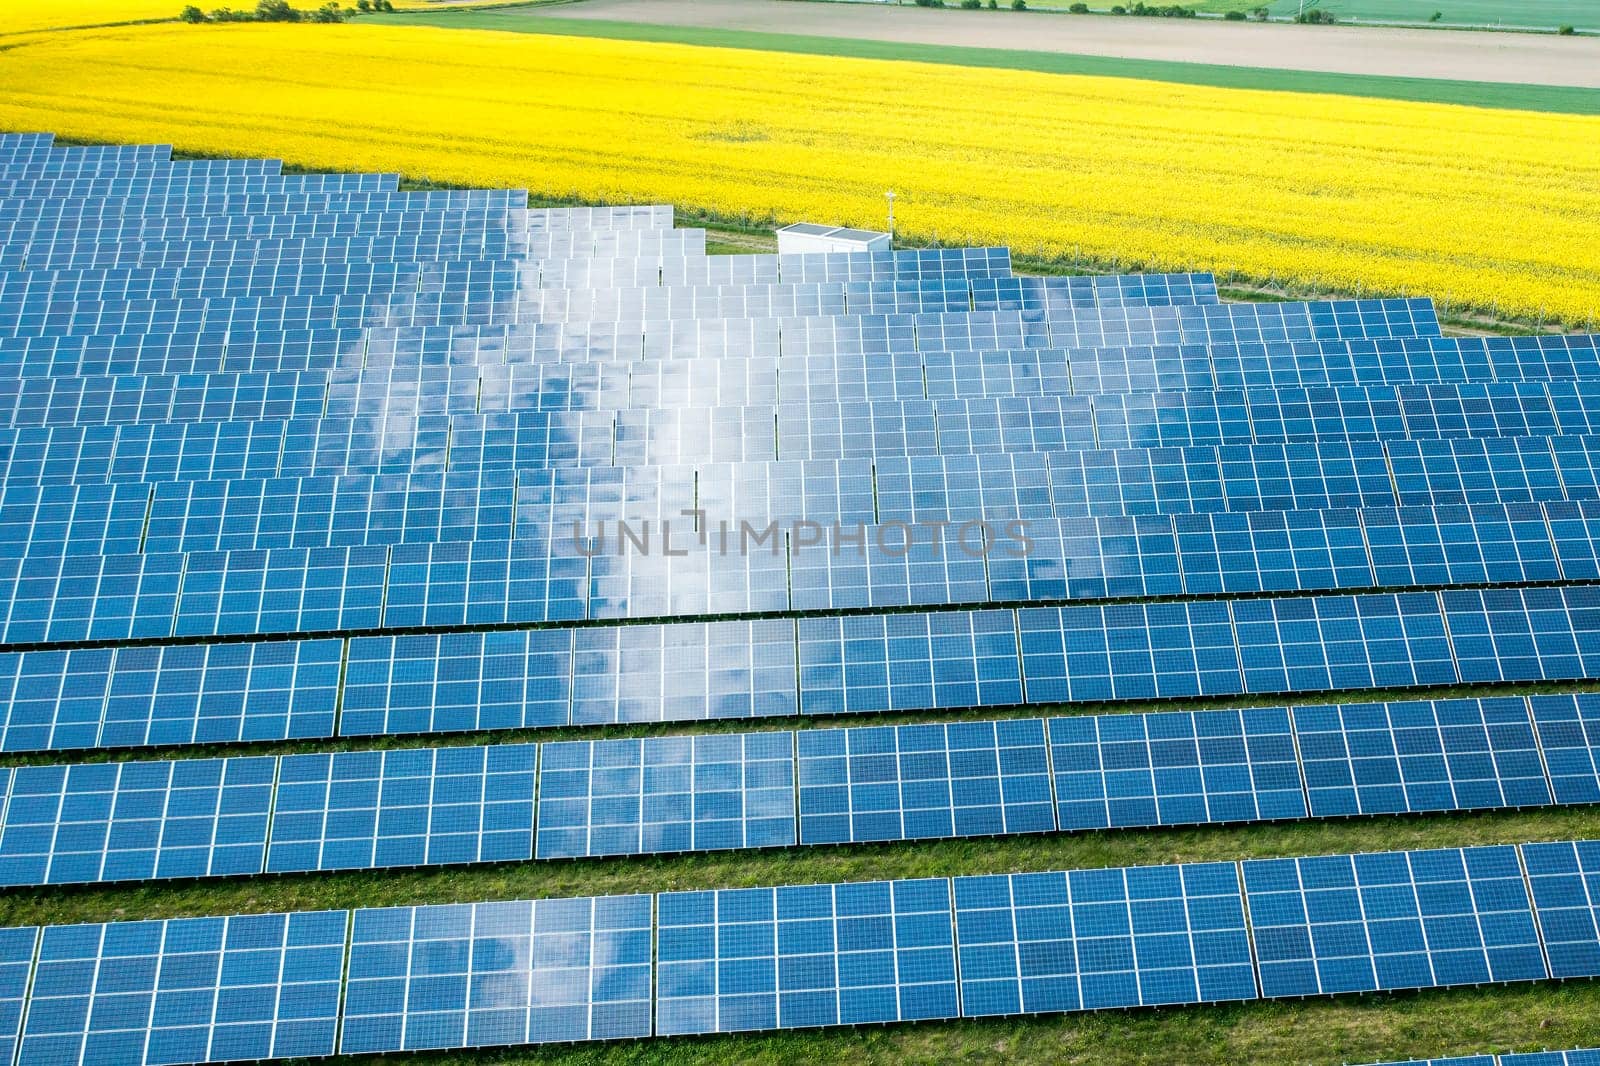 Solar panel for generation of direct current electricity in the yellow field. Photovoltaic and alternative resource of power, aerial view